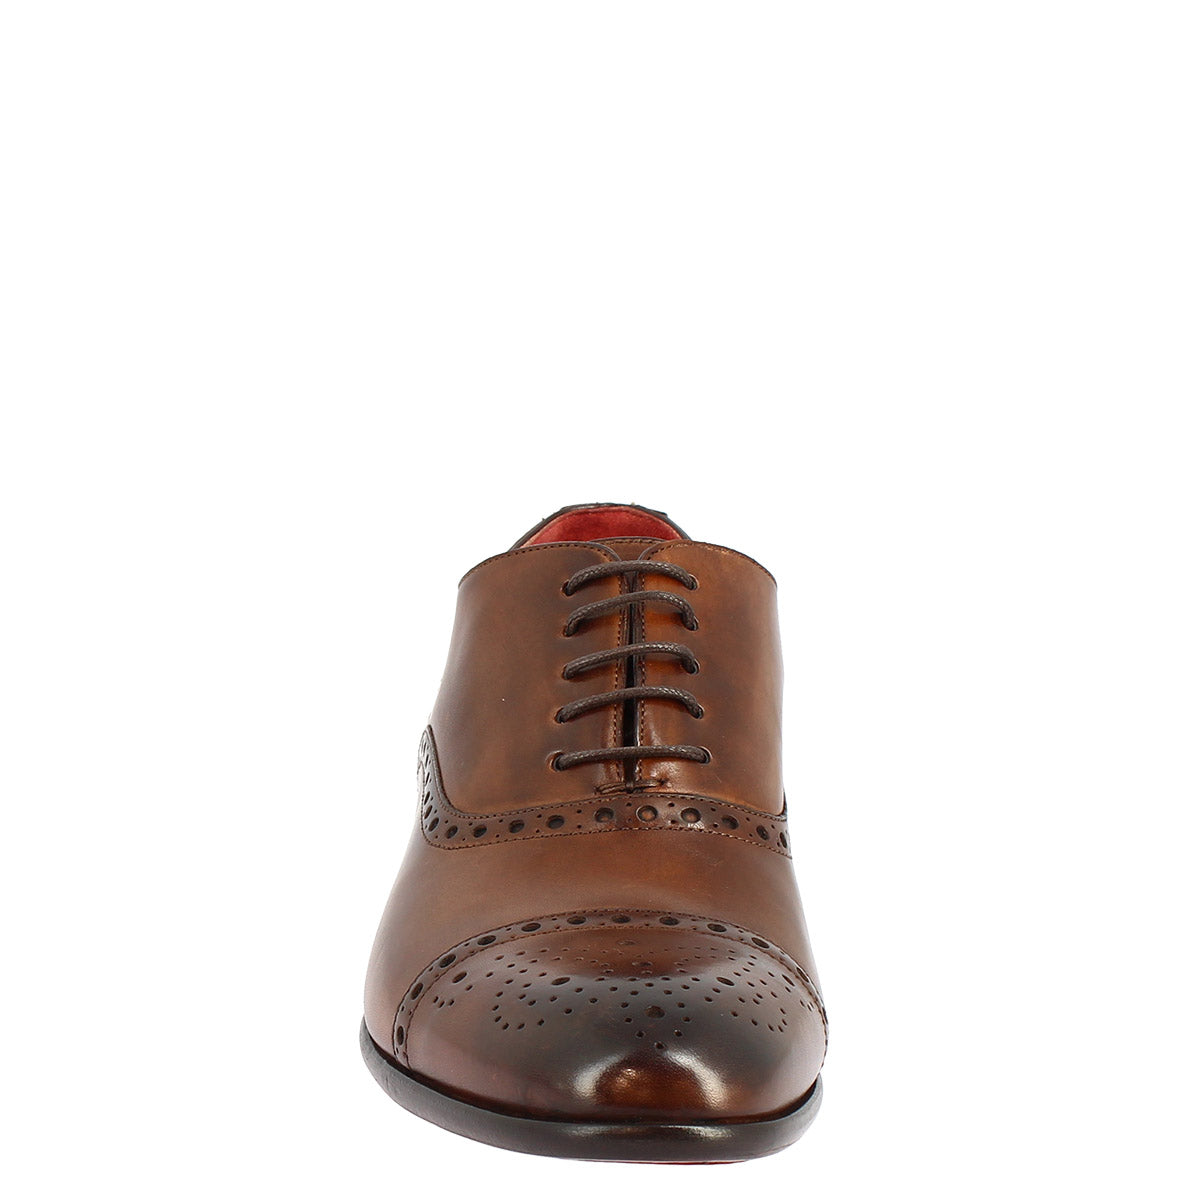 Men's lace-up brogues shoes handmade in montecarlo brandy leather